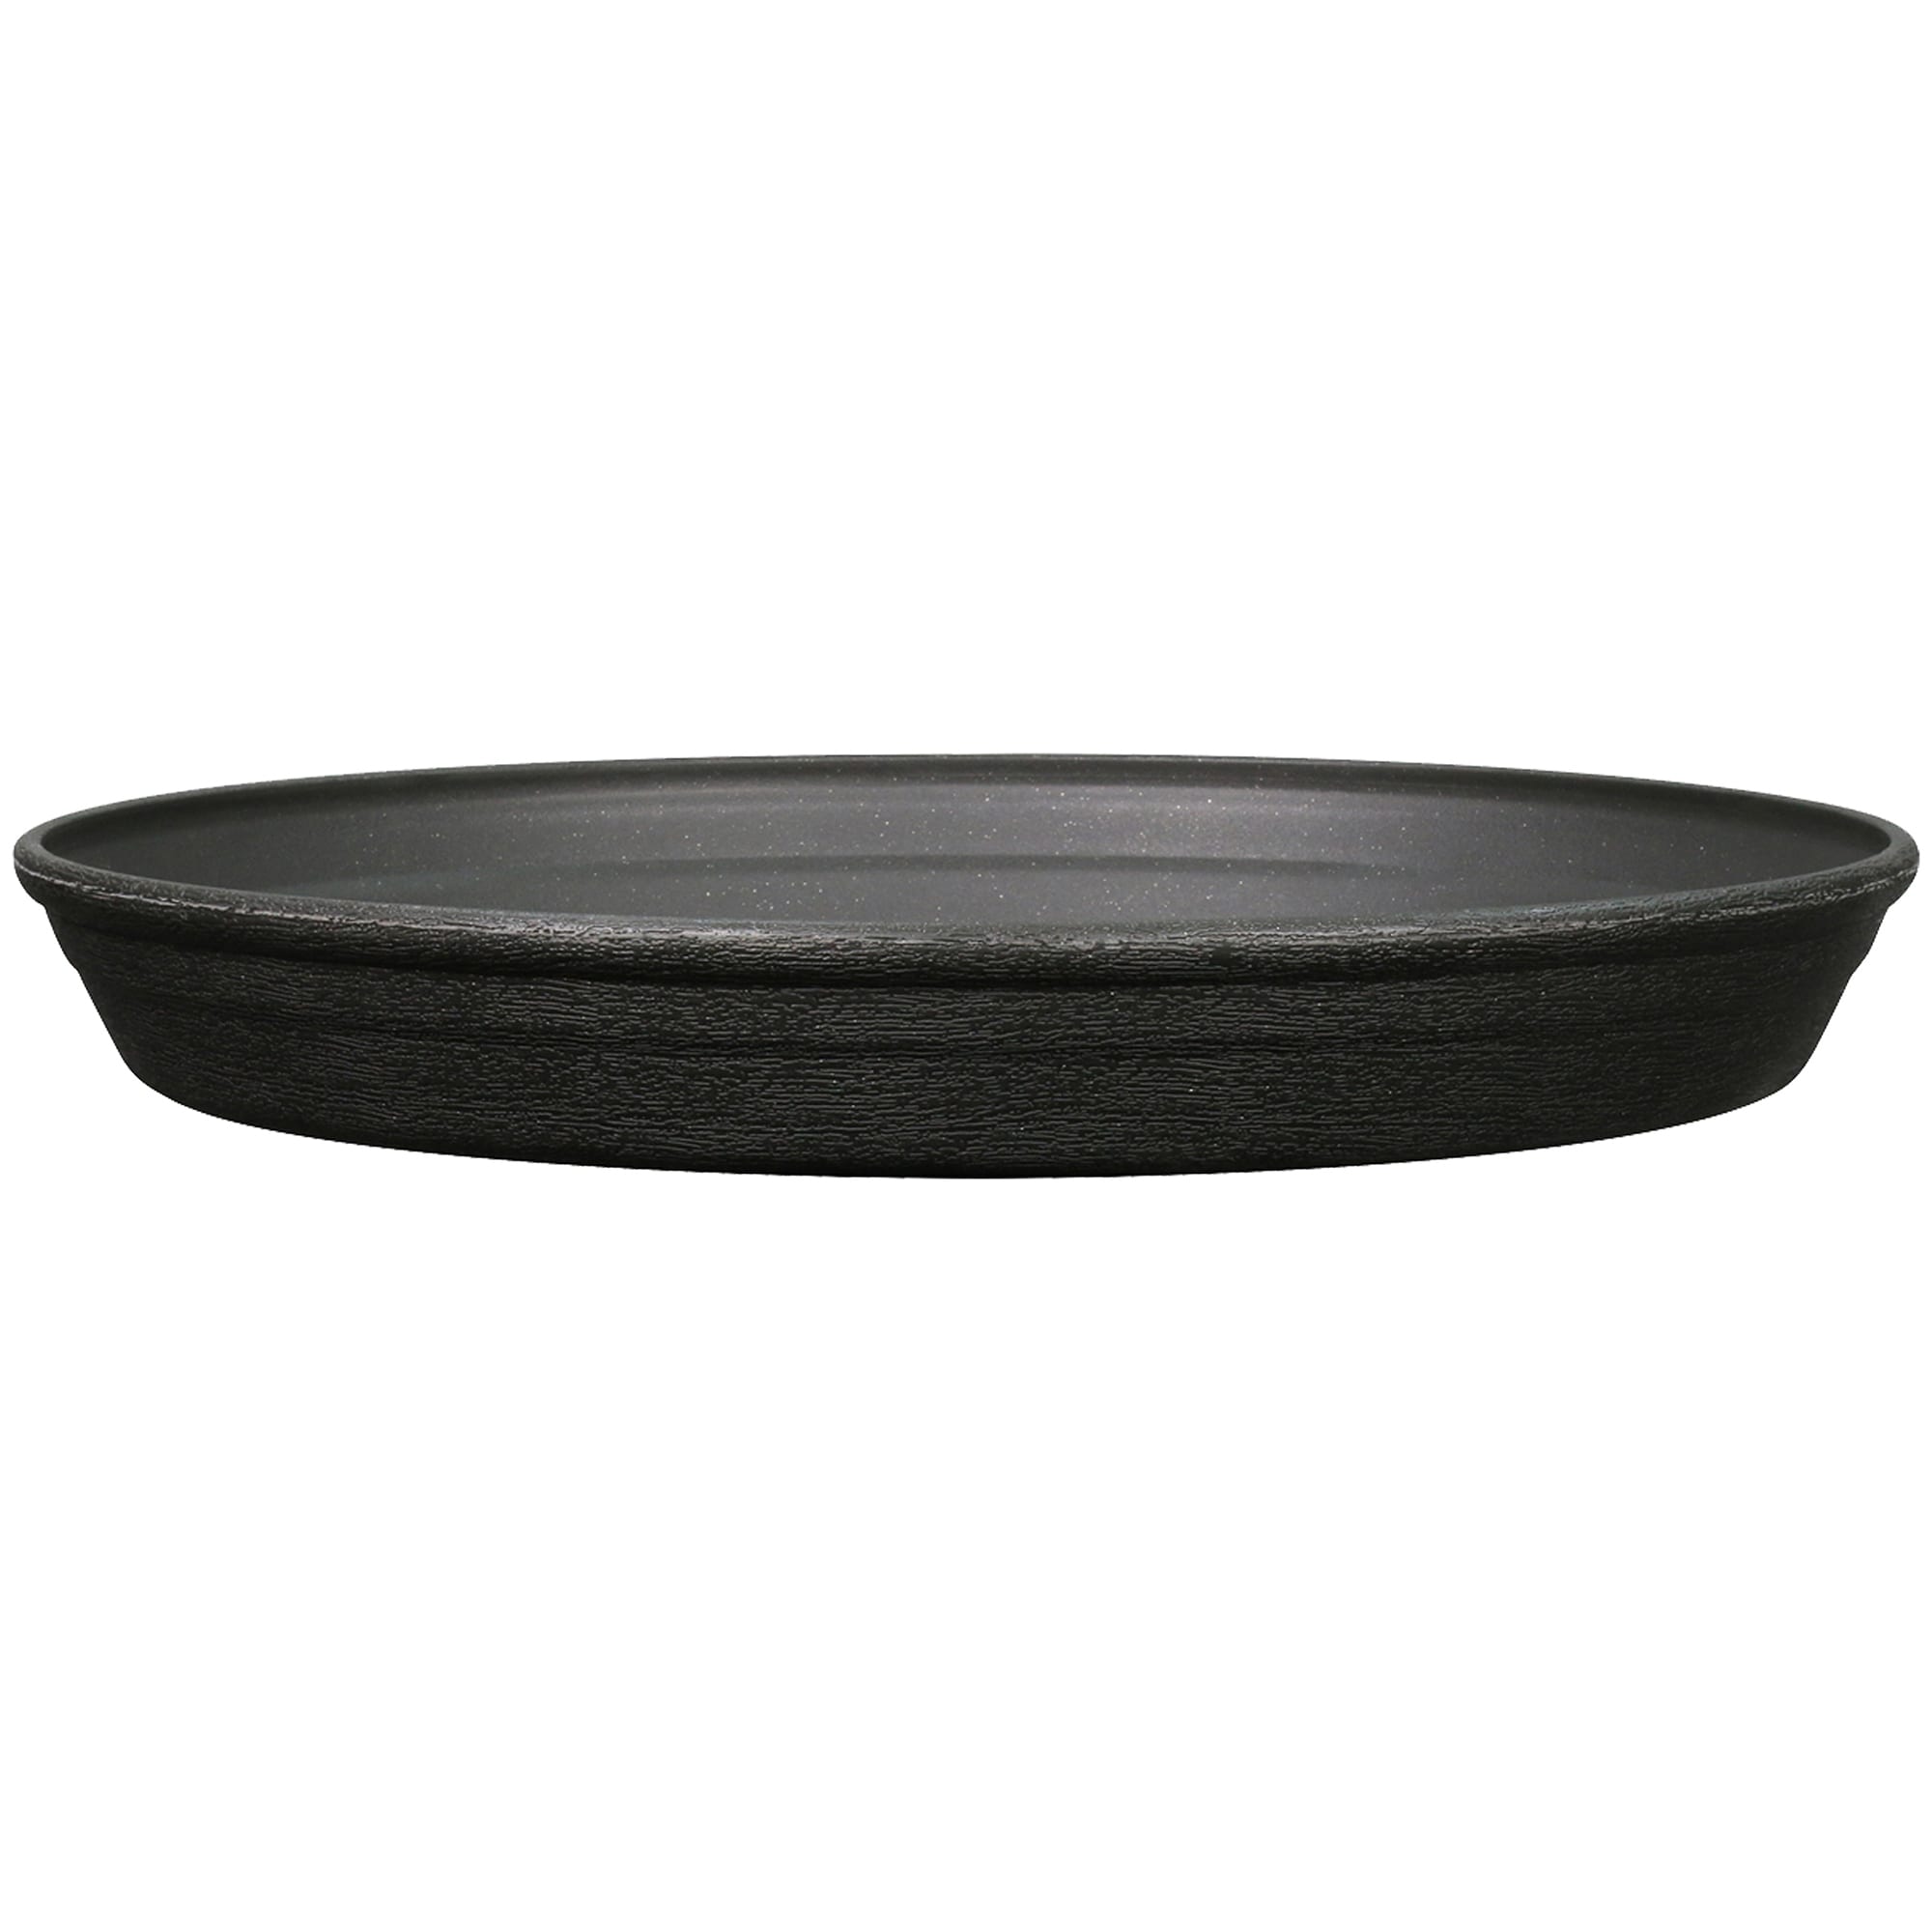 Plant Saucers at Lowes.com